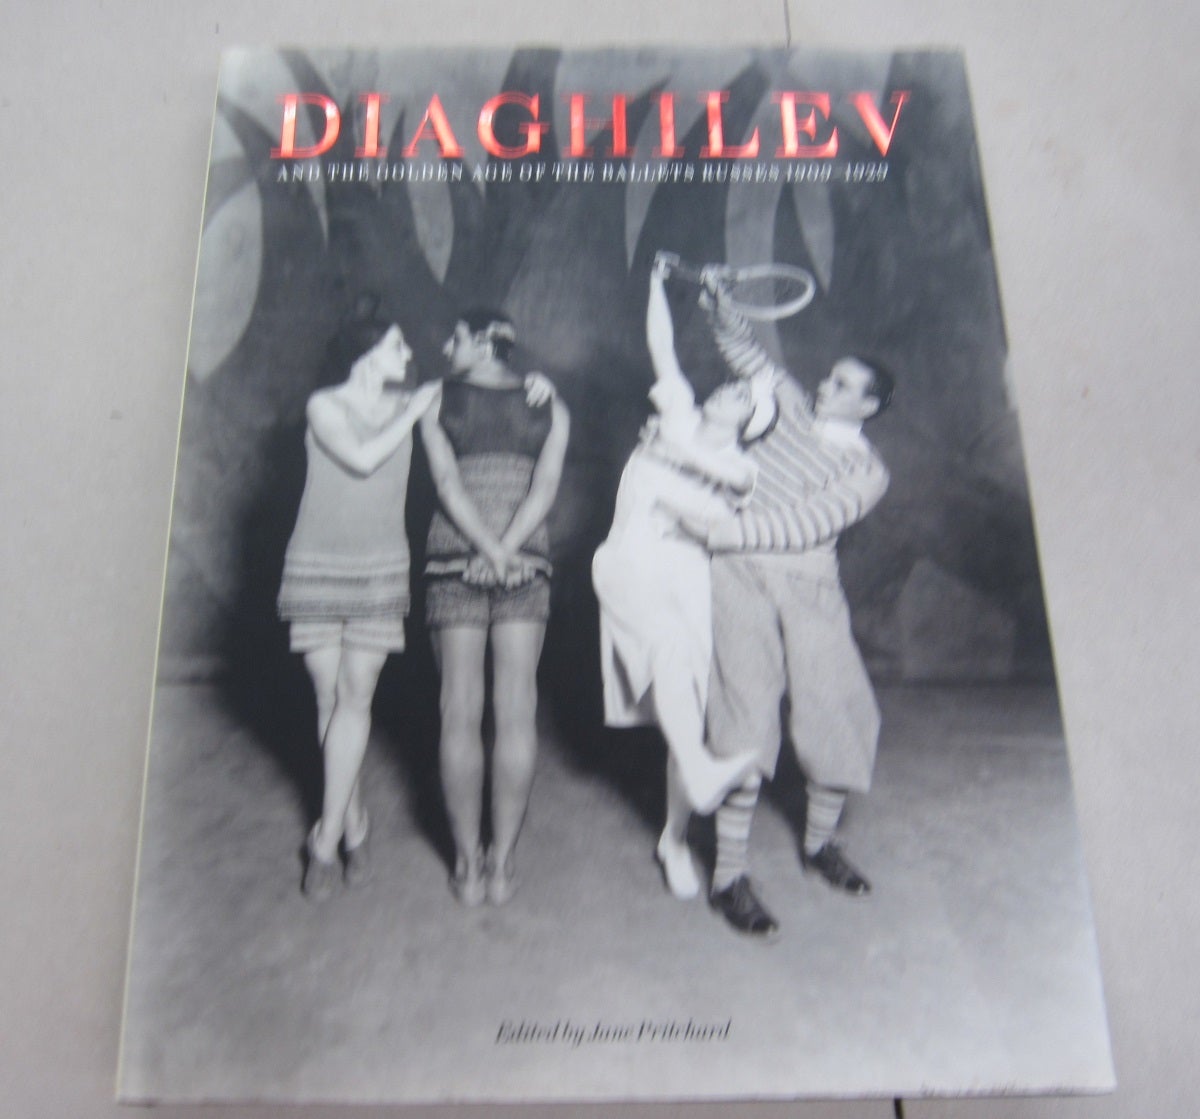 Diaghilev and the Golden Age of the Ballets Russes 1909-1929 by Jane  Pritchard on Midway Book Store